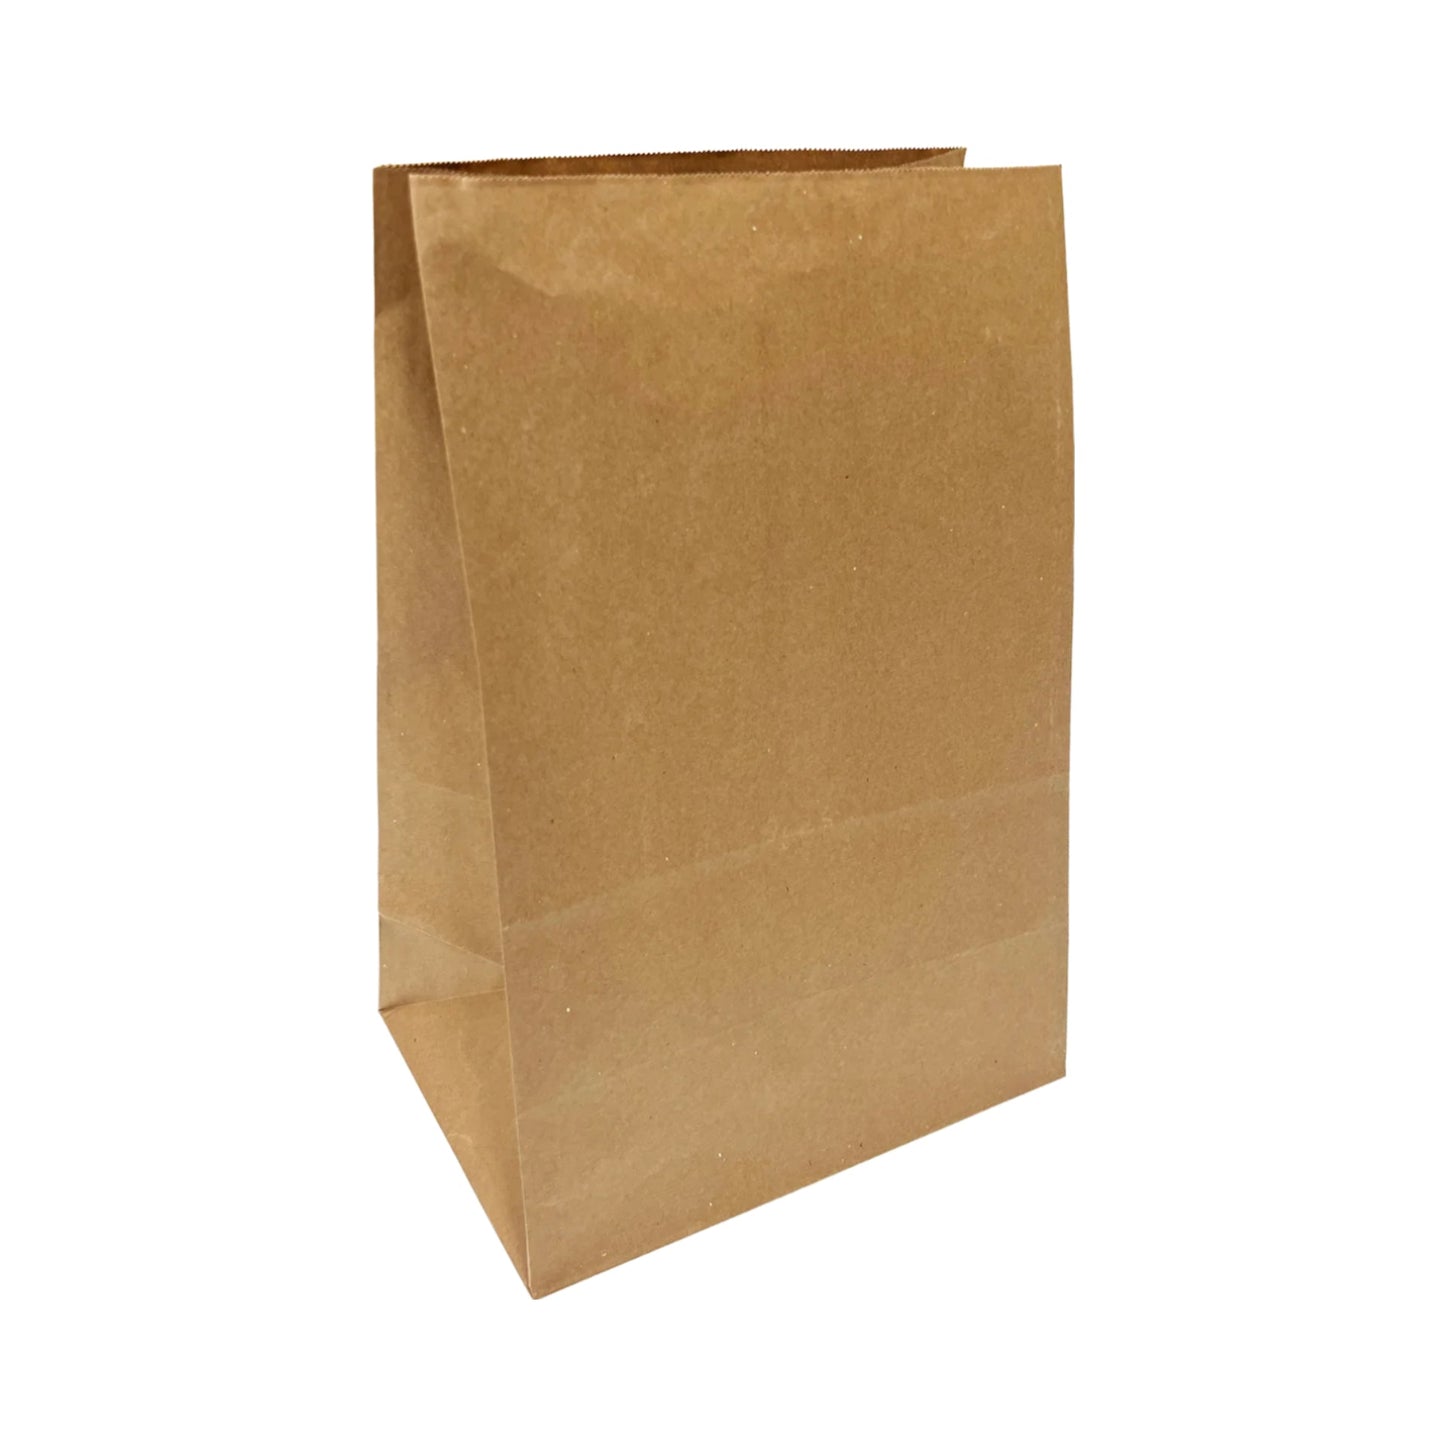 500pcs #3 Grocery Bags 4.5x3.75x9 inches; $0.046/pc